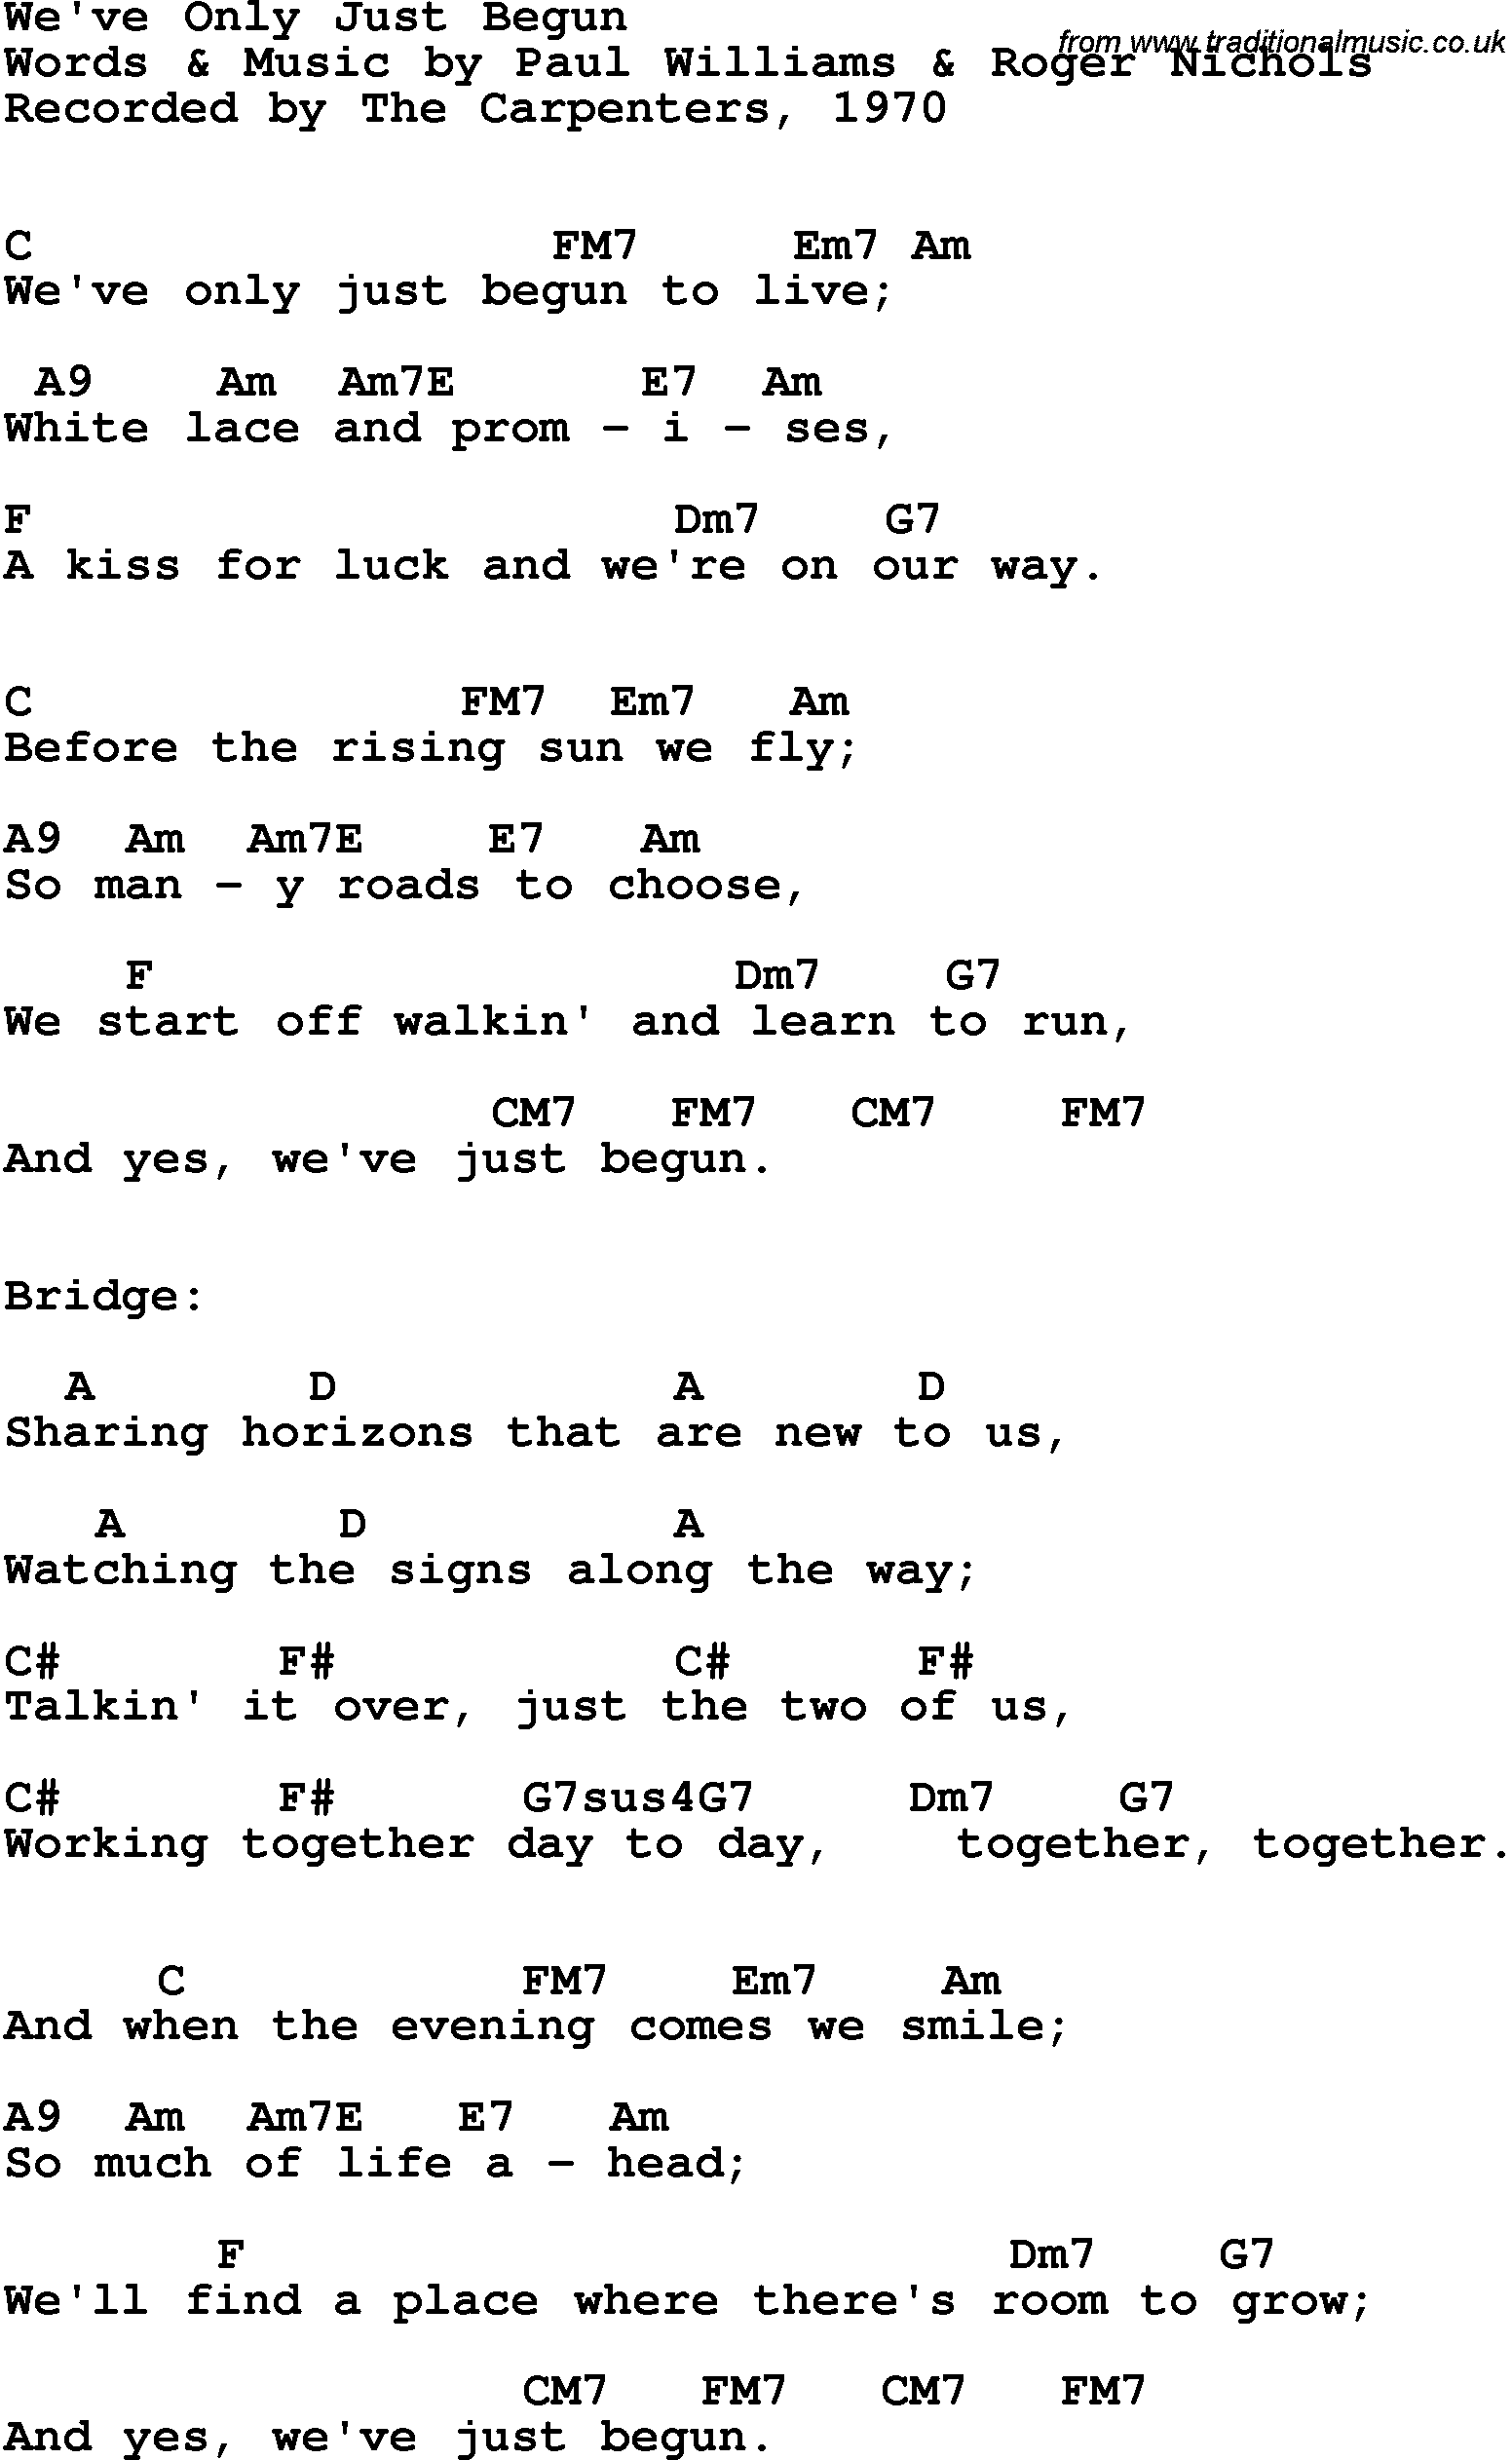 Song Lyrics with guitar chords for We've Only Just Begun - Carpenters, The, 1970